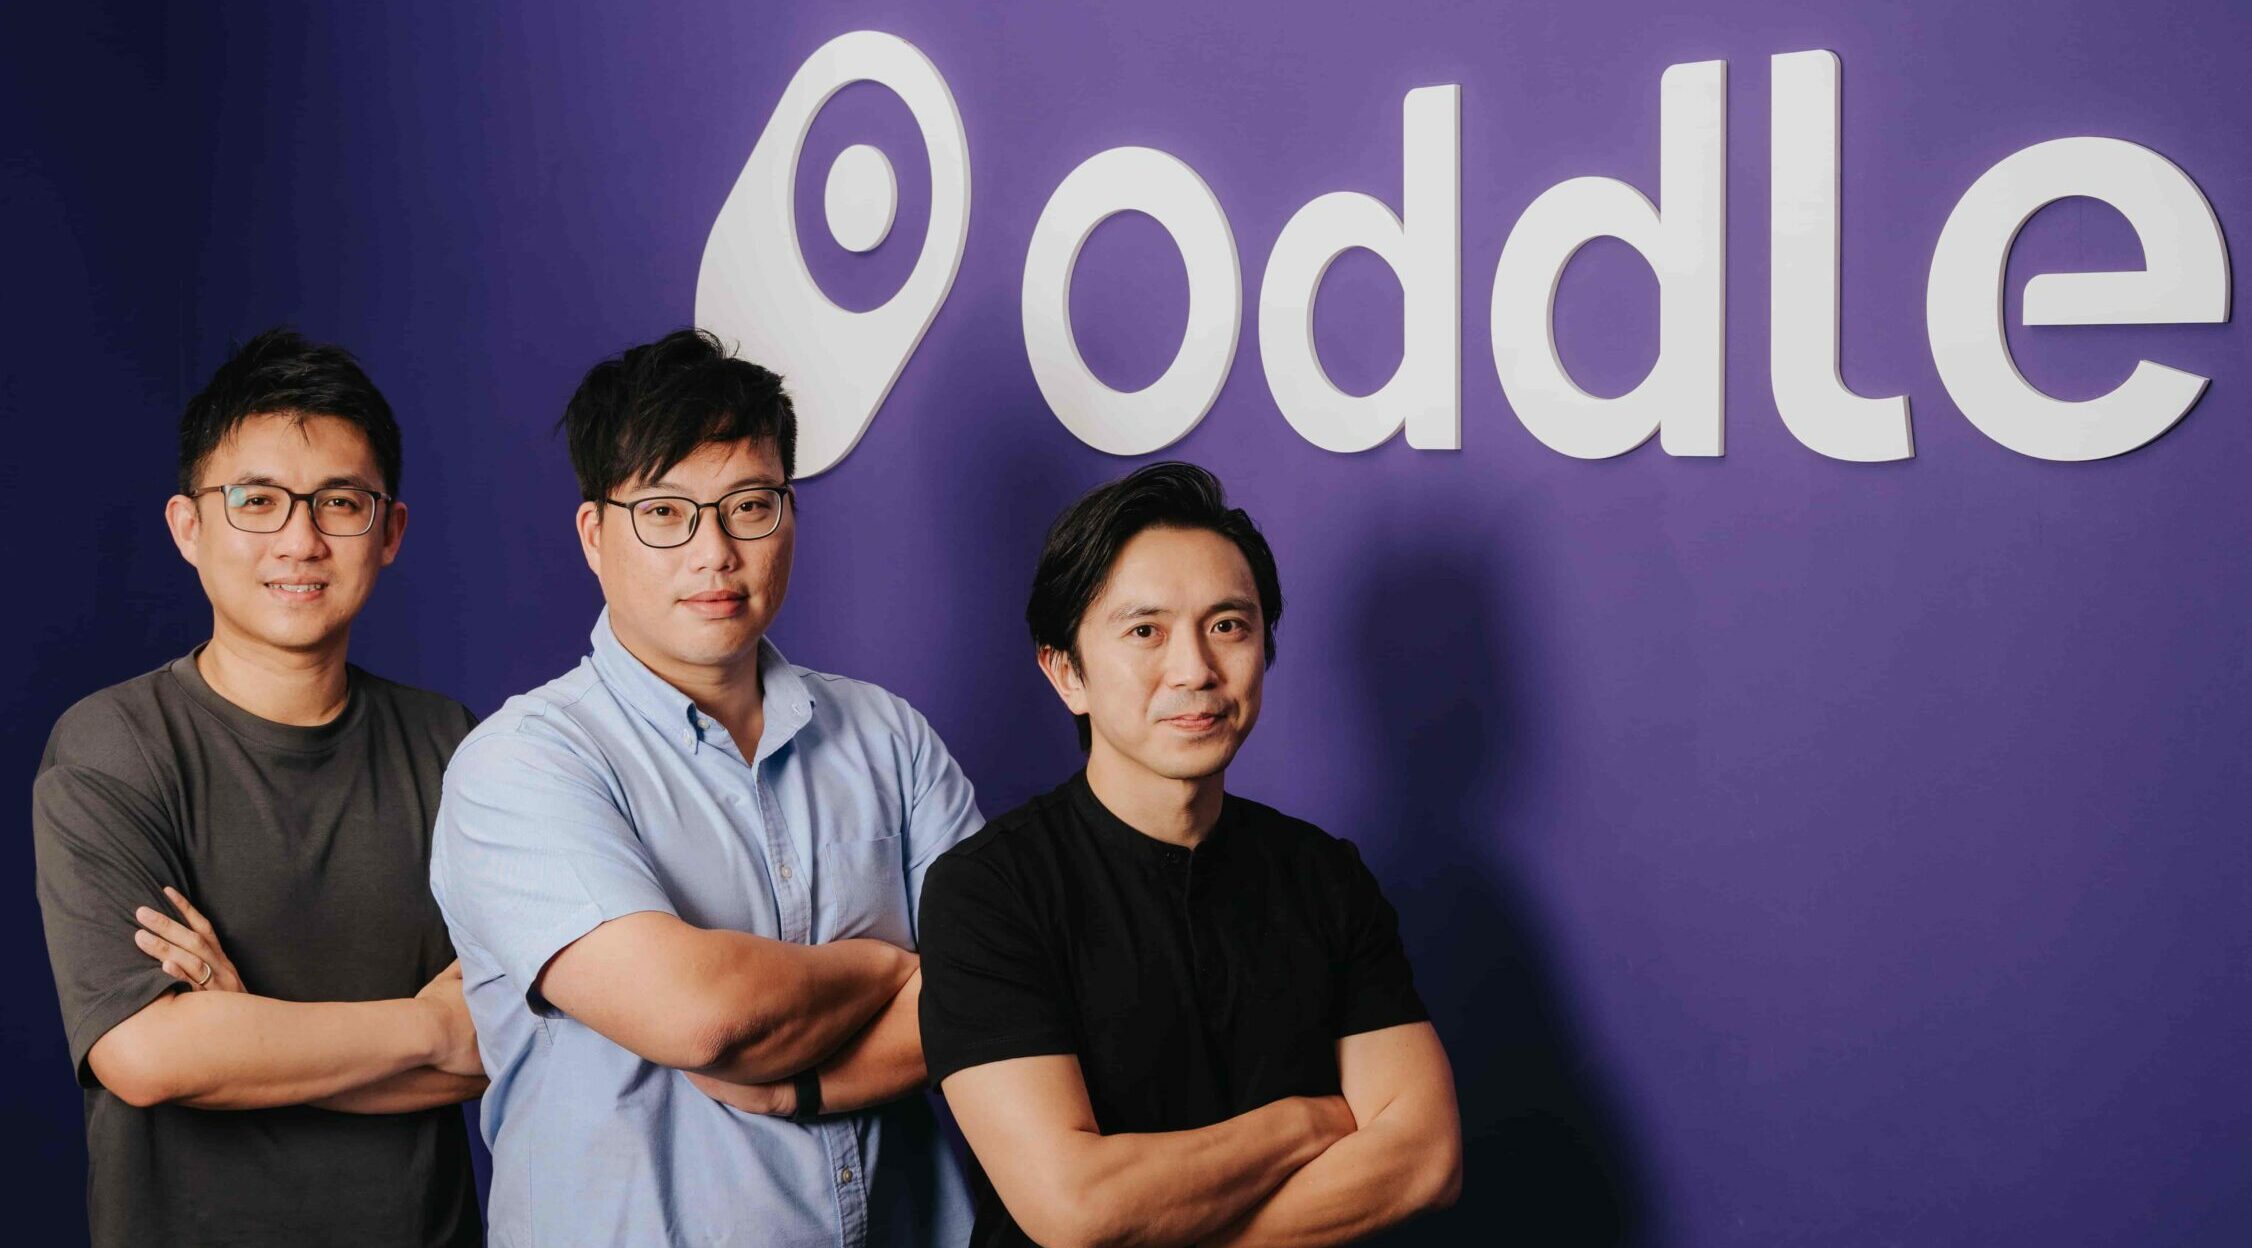 Photoshoot Image of Oddle's Founders Standing in front of a Oddle Logo